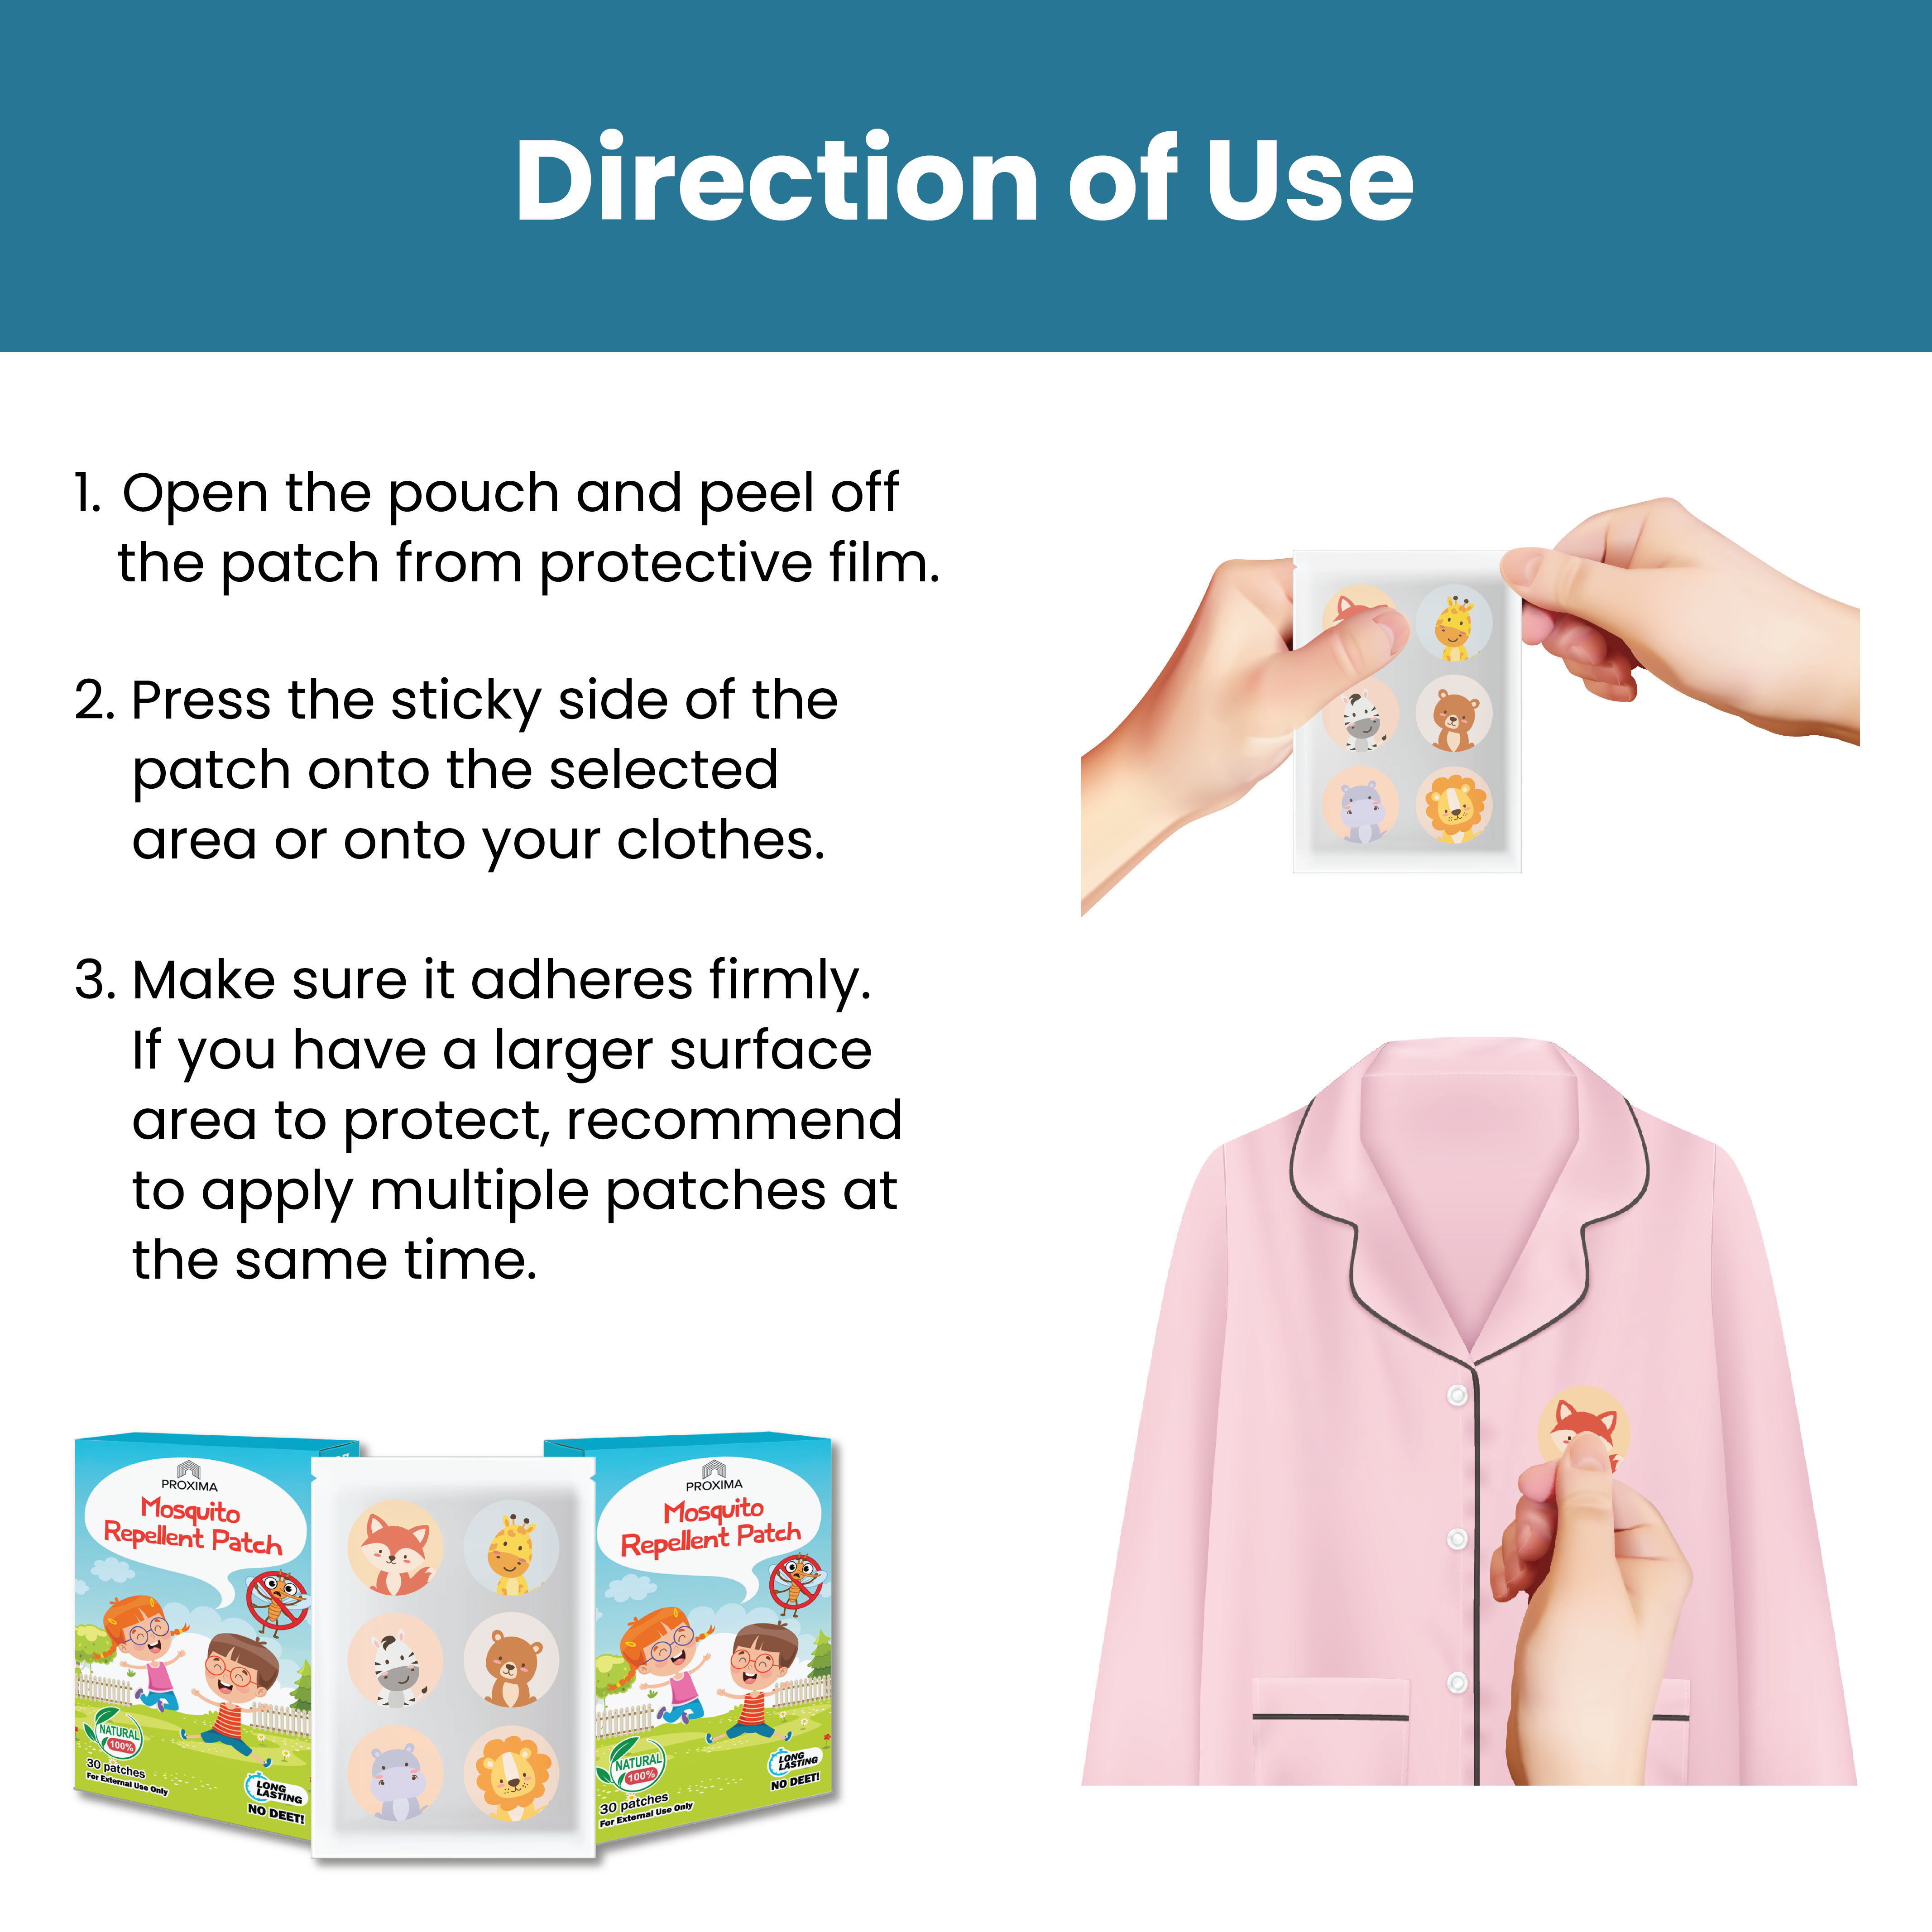 Mosquito Repellent Patch Shopee Posting LATEST-05